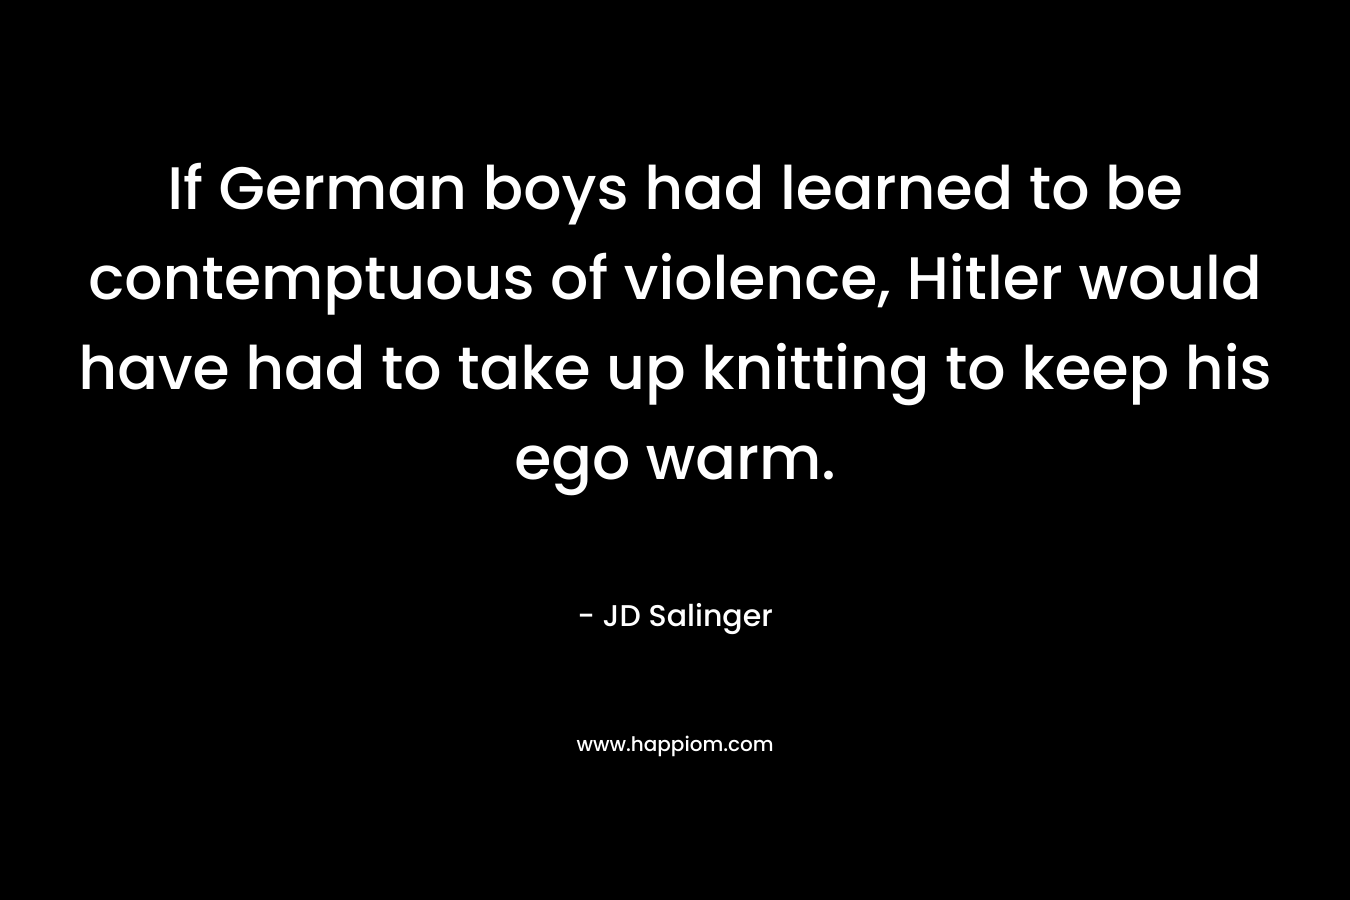 If German boys had learned to be contemptuous of violence, Hitler would have had to take up knitting to keep his ego warm. – JD Salinger